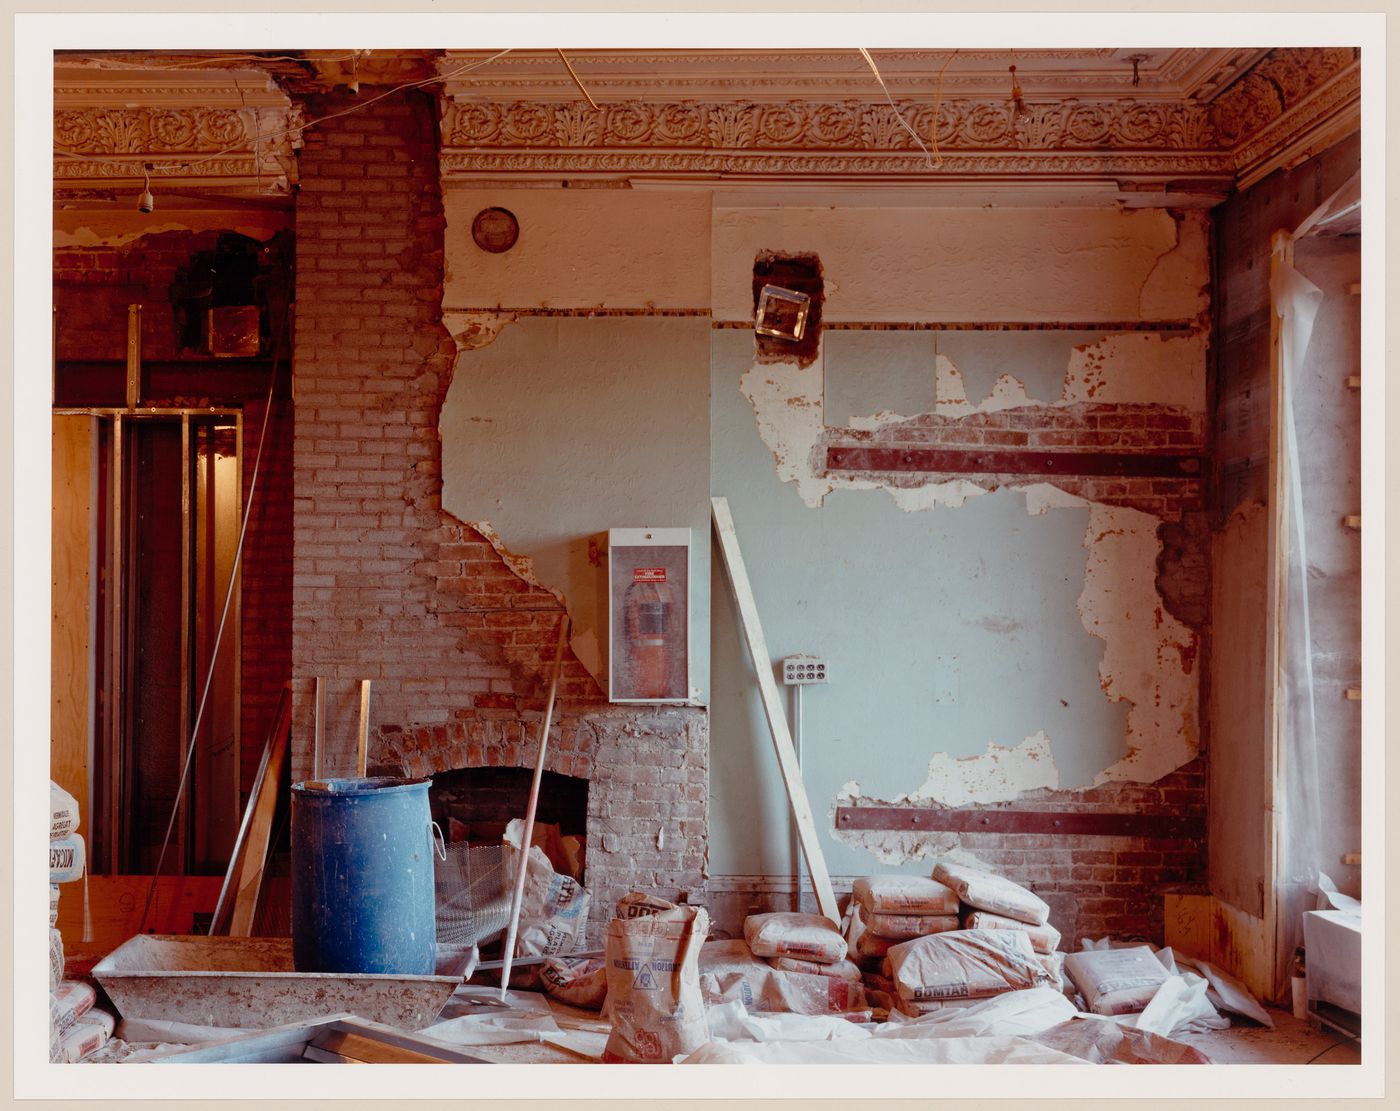 Interior view of a room showing a fireplace, Shaughnessy House under renovation, Montréal, Québec